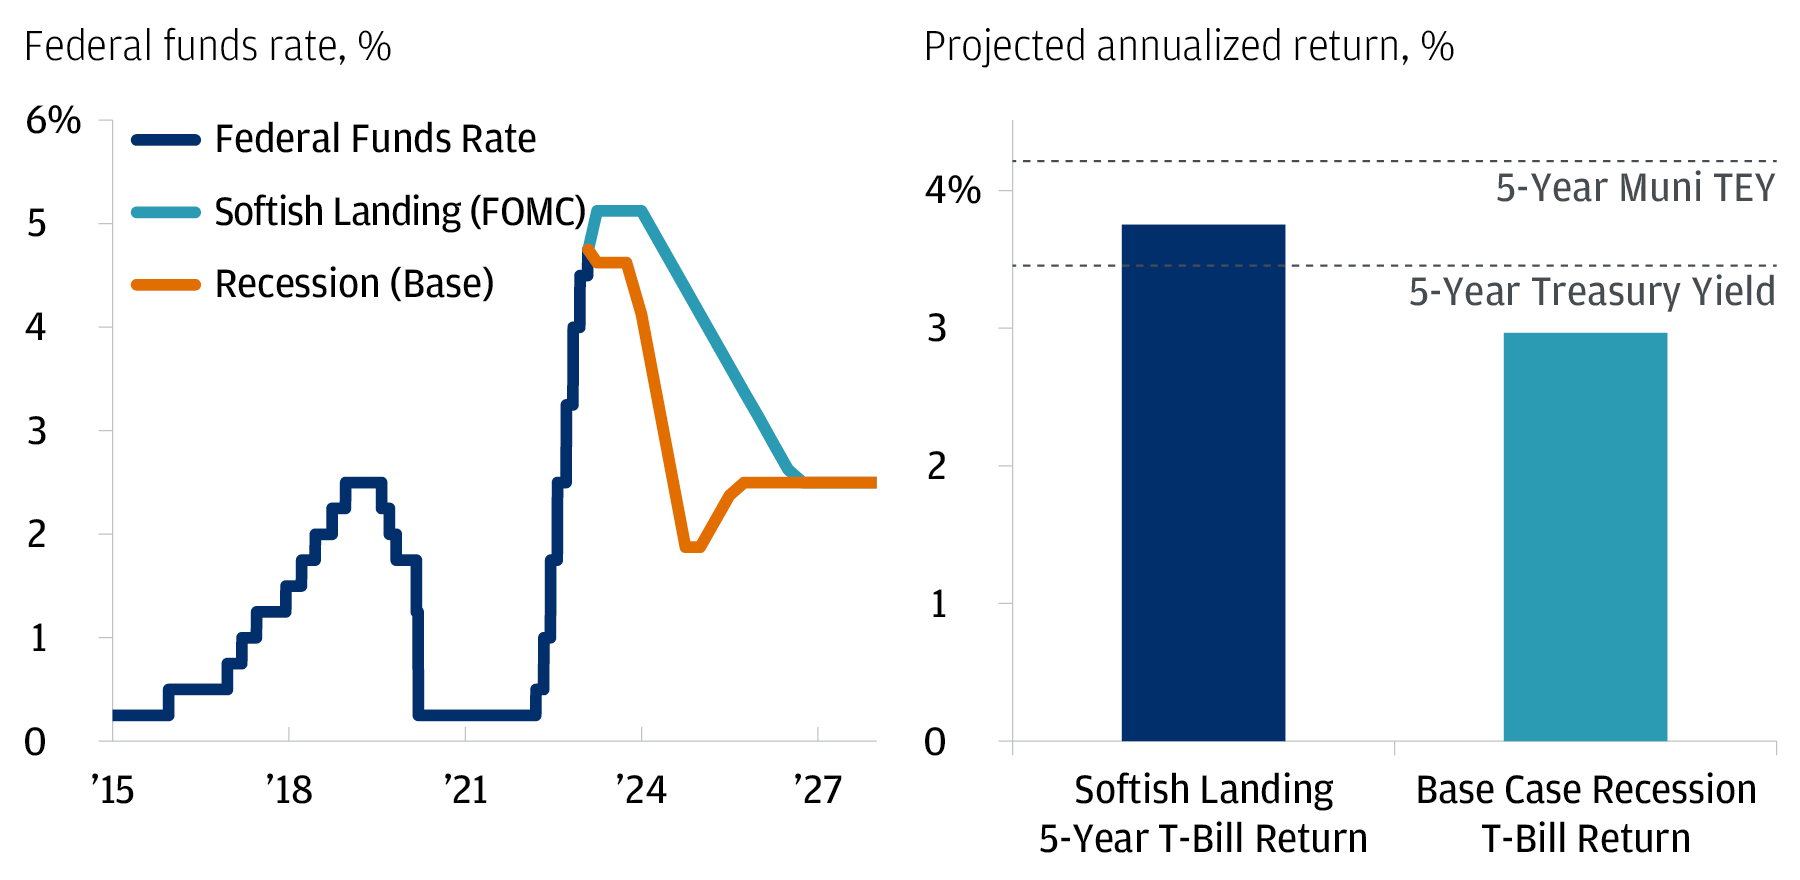 The left chart shows the Federal Funds Rate from 2015 to 2023 and two projections into 2029, one based on a softish landing that the FOMC expects, and one that is a mild recession that J.P. Morgan Private Bank expects. On the right side is projected returns of Treasury bills for both the softish landing and recession case.